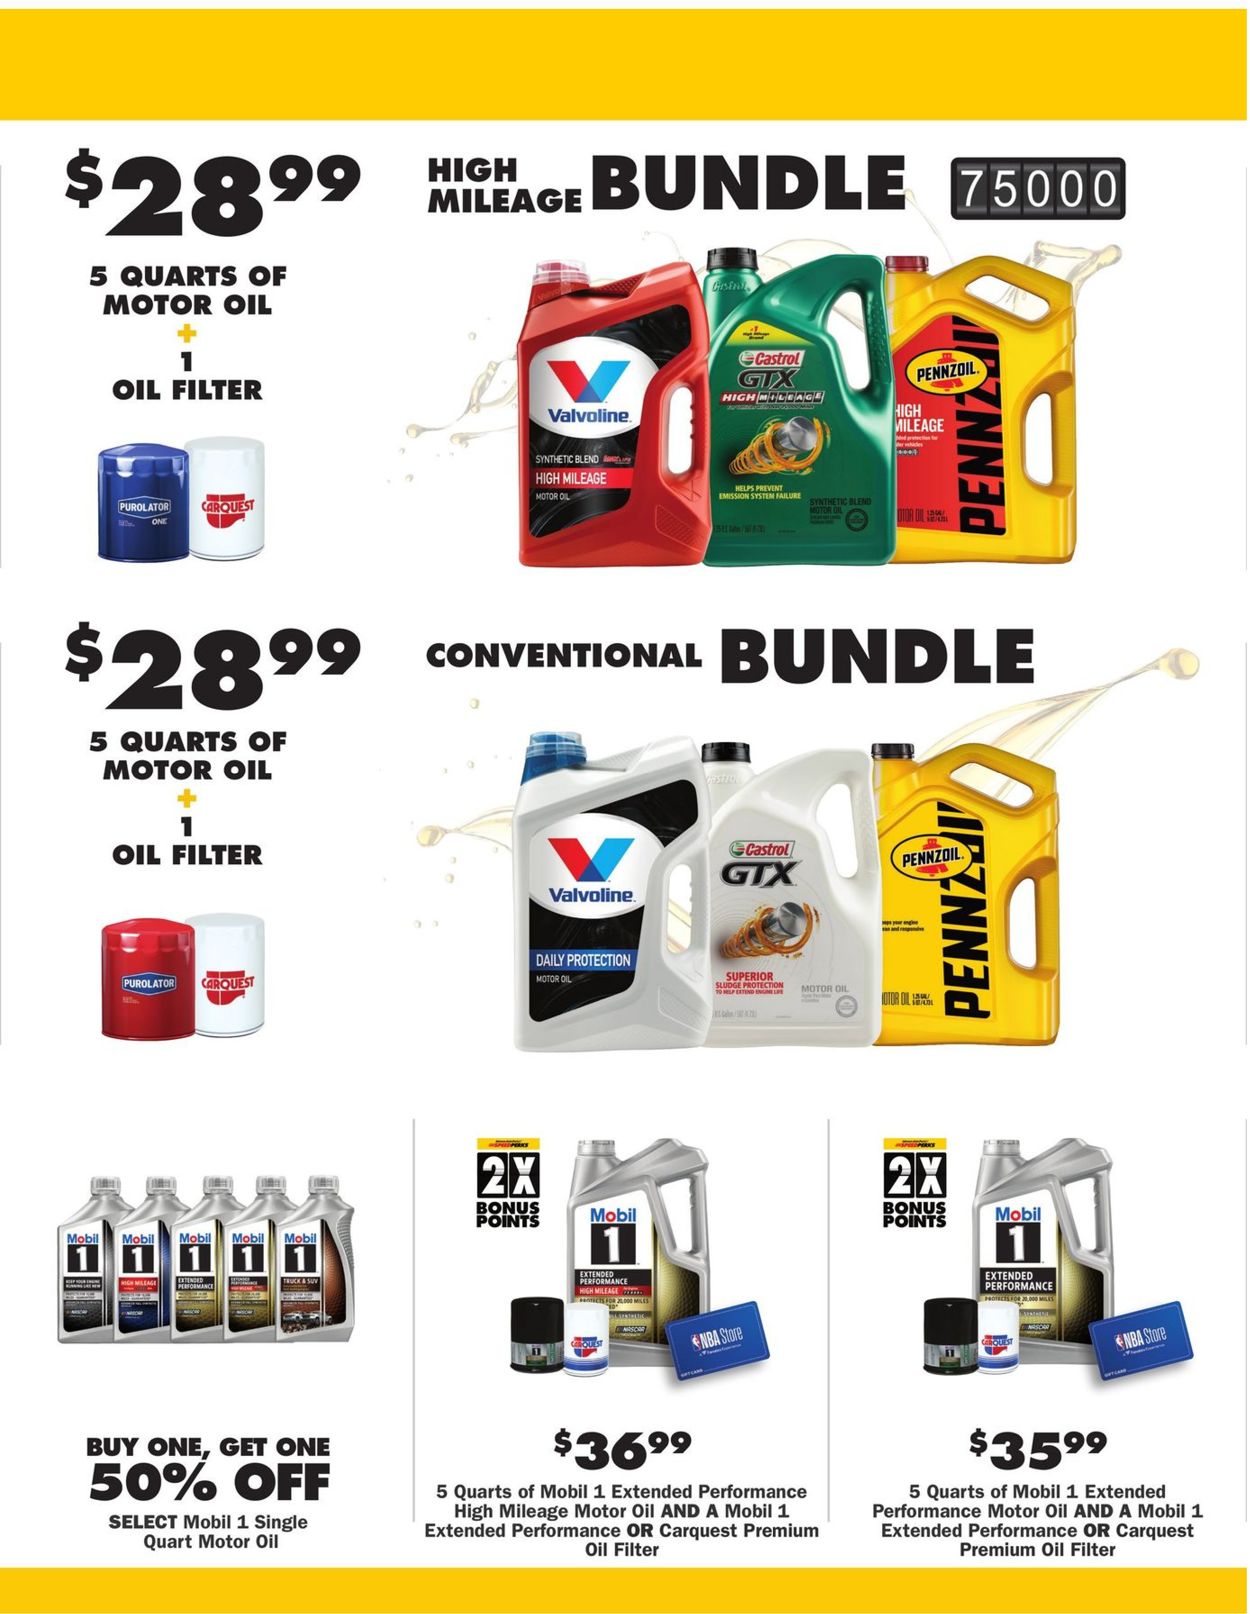 carquest-current-weekly-ad-10-29-12-30-2020-3-frequent-ads